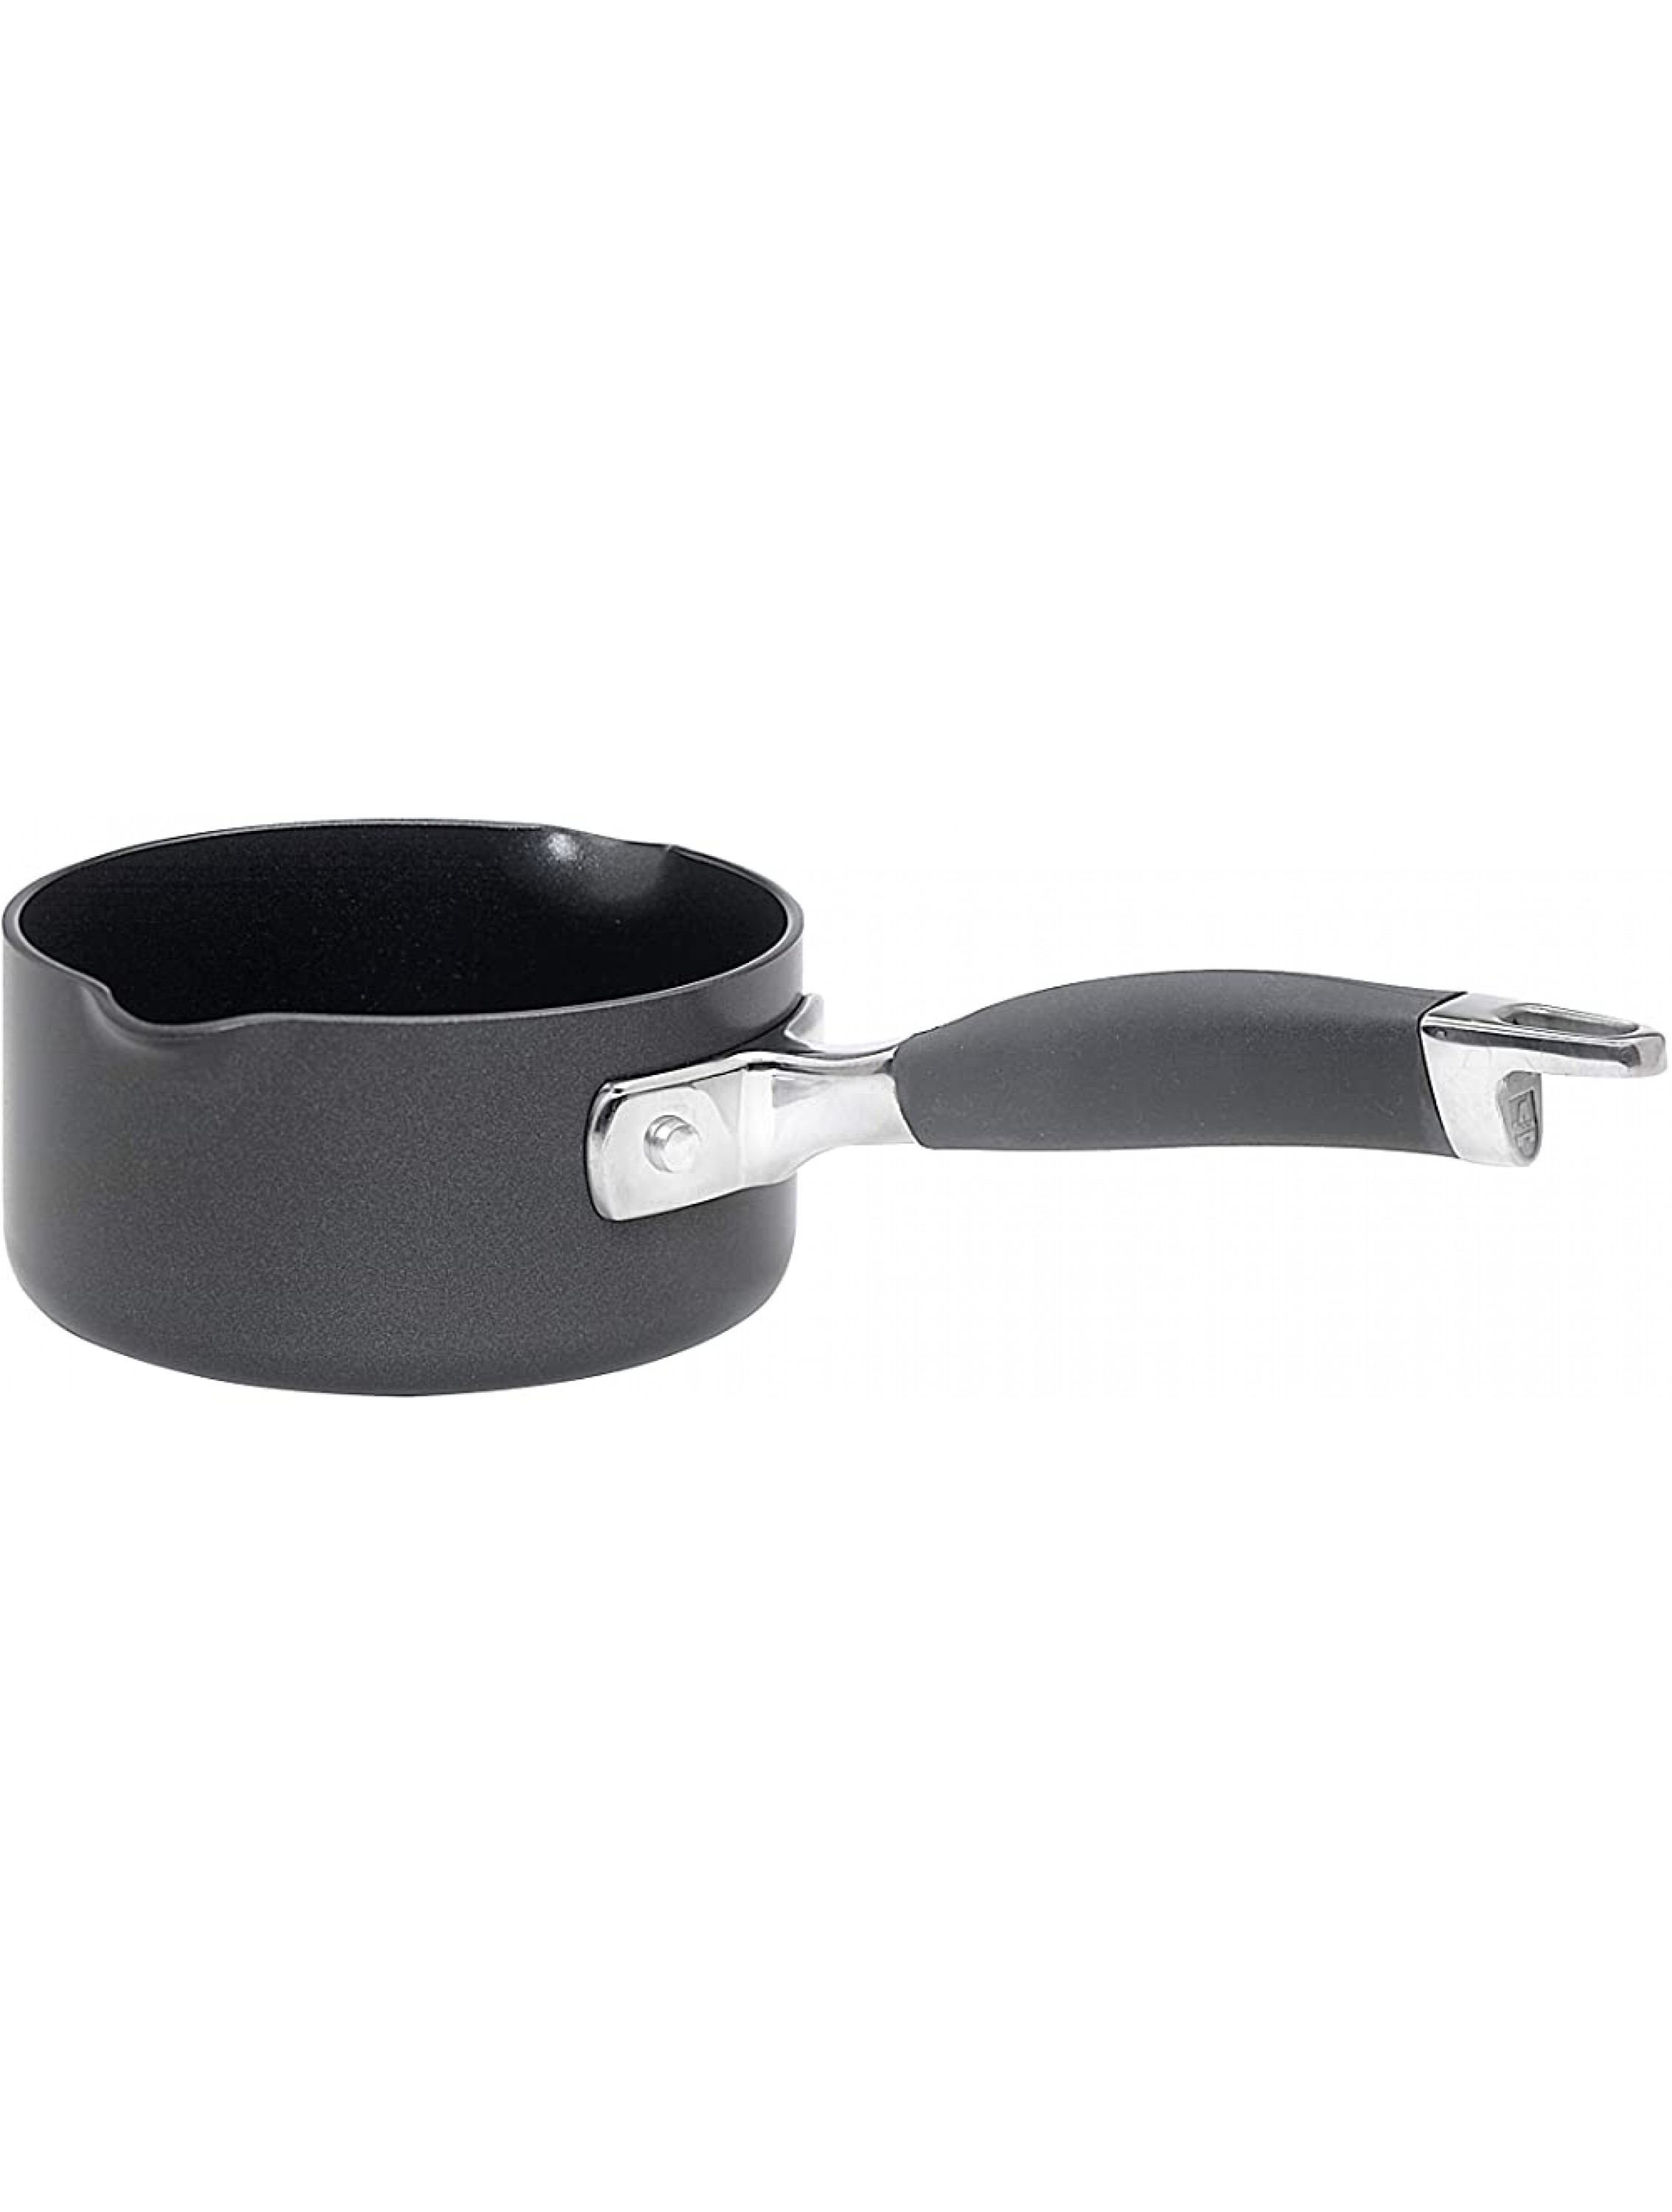 Anolon Advanced Hard Anodized Nonstick Sauce Pan Saucepan with Straining and Pour Spouts 1 Quart Gray - BWD9XXW1H